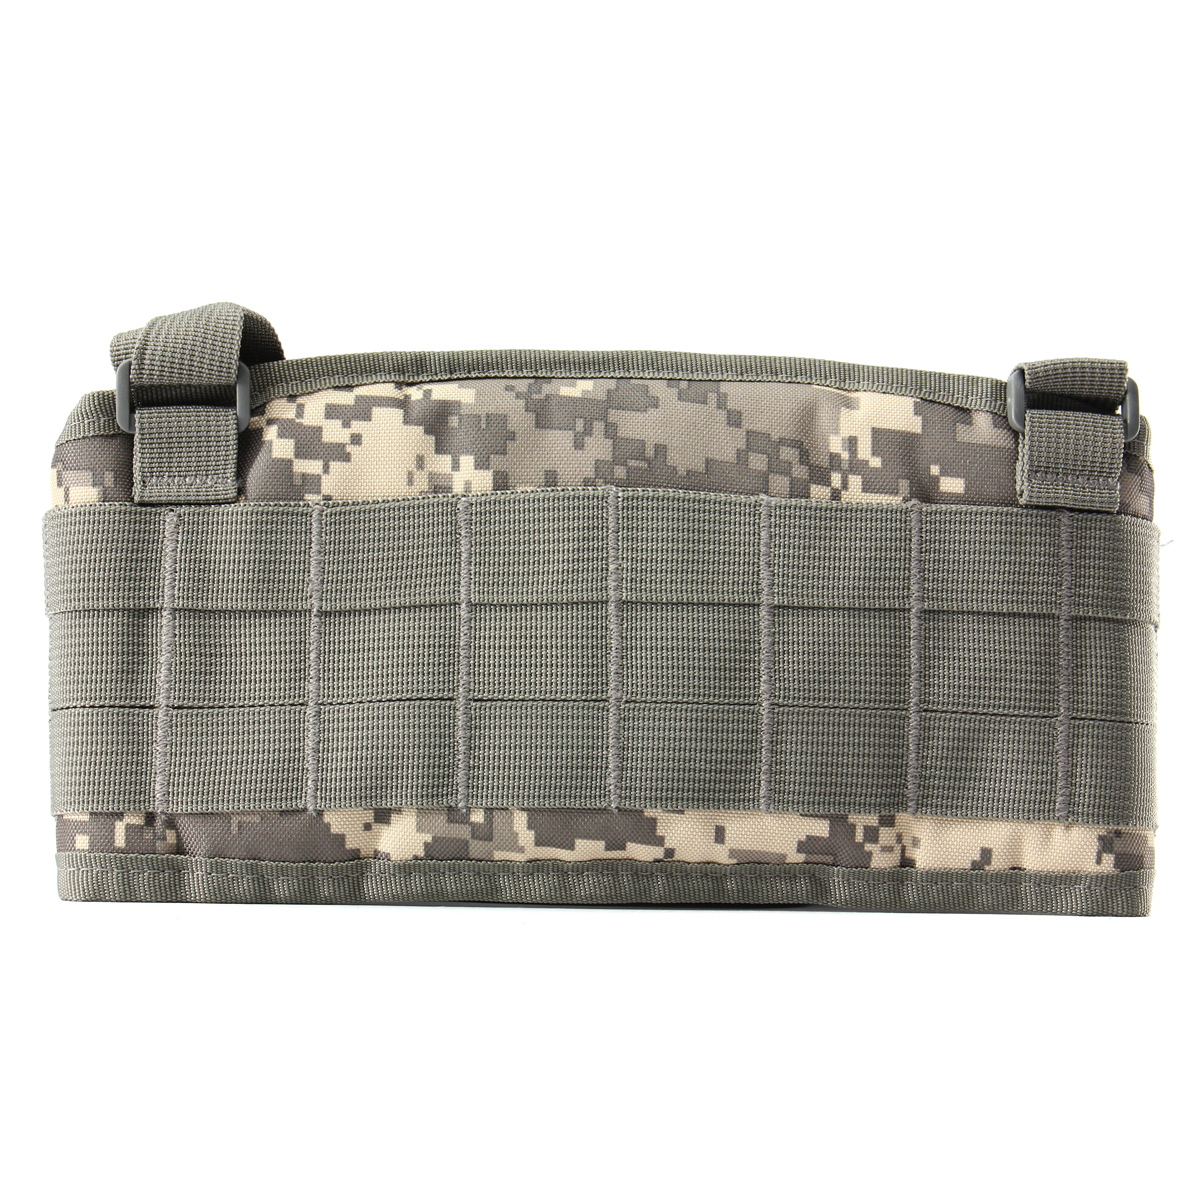 Military-Nylon-Molle-Waist-Combat-Belt-With-Harness-Tactical-Adjustable-Soft-Padded-Universal-Unisex-1817236-5